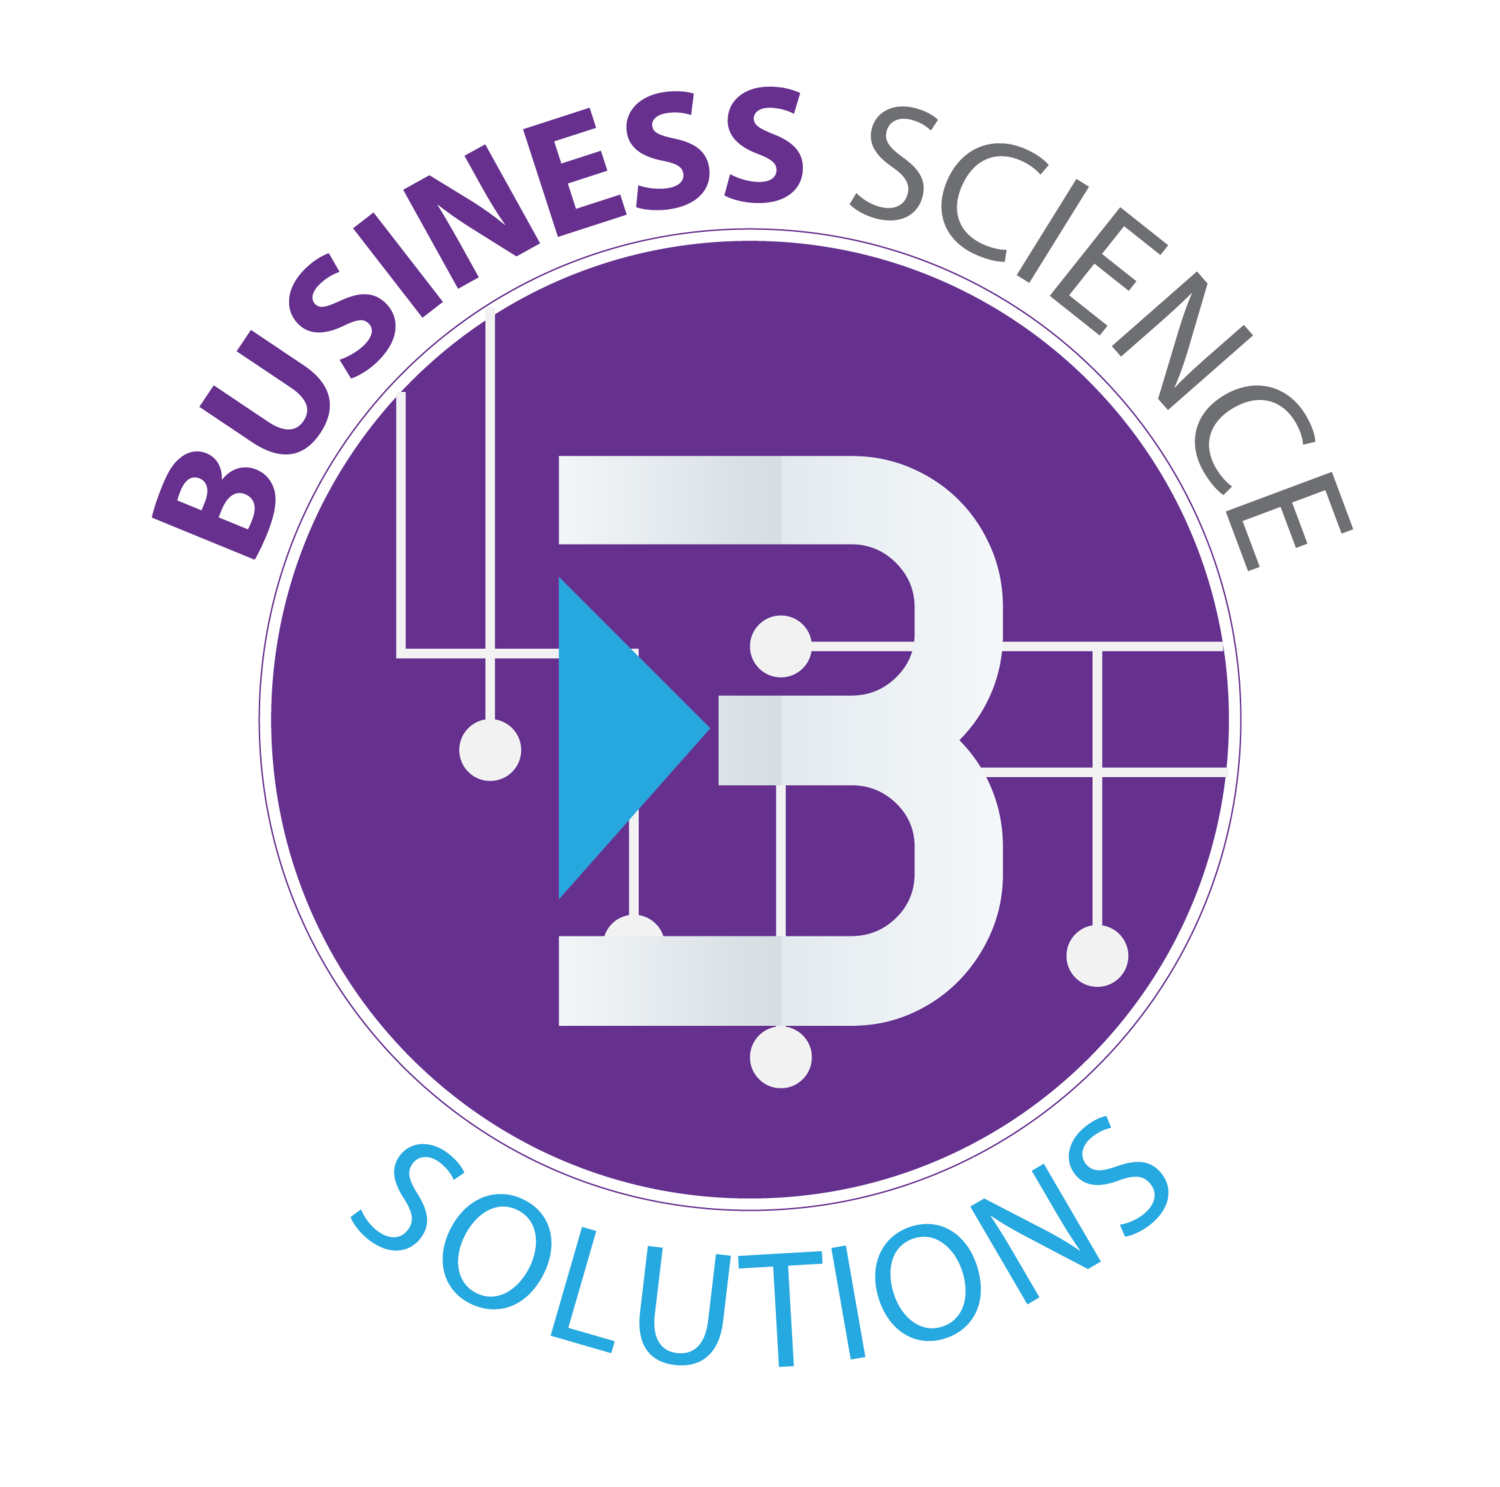 Business Science Solutions